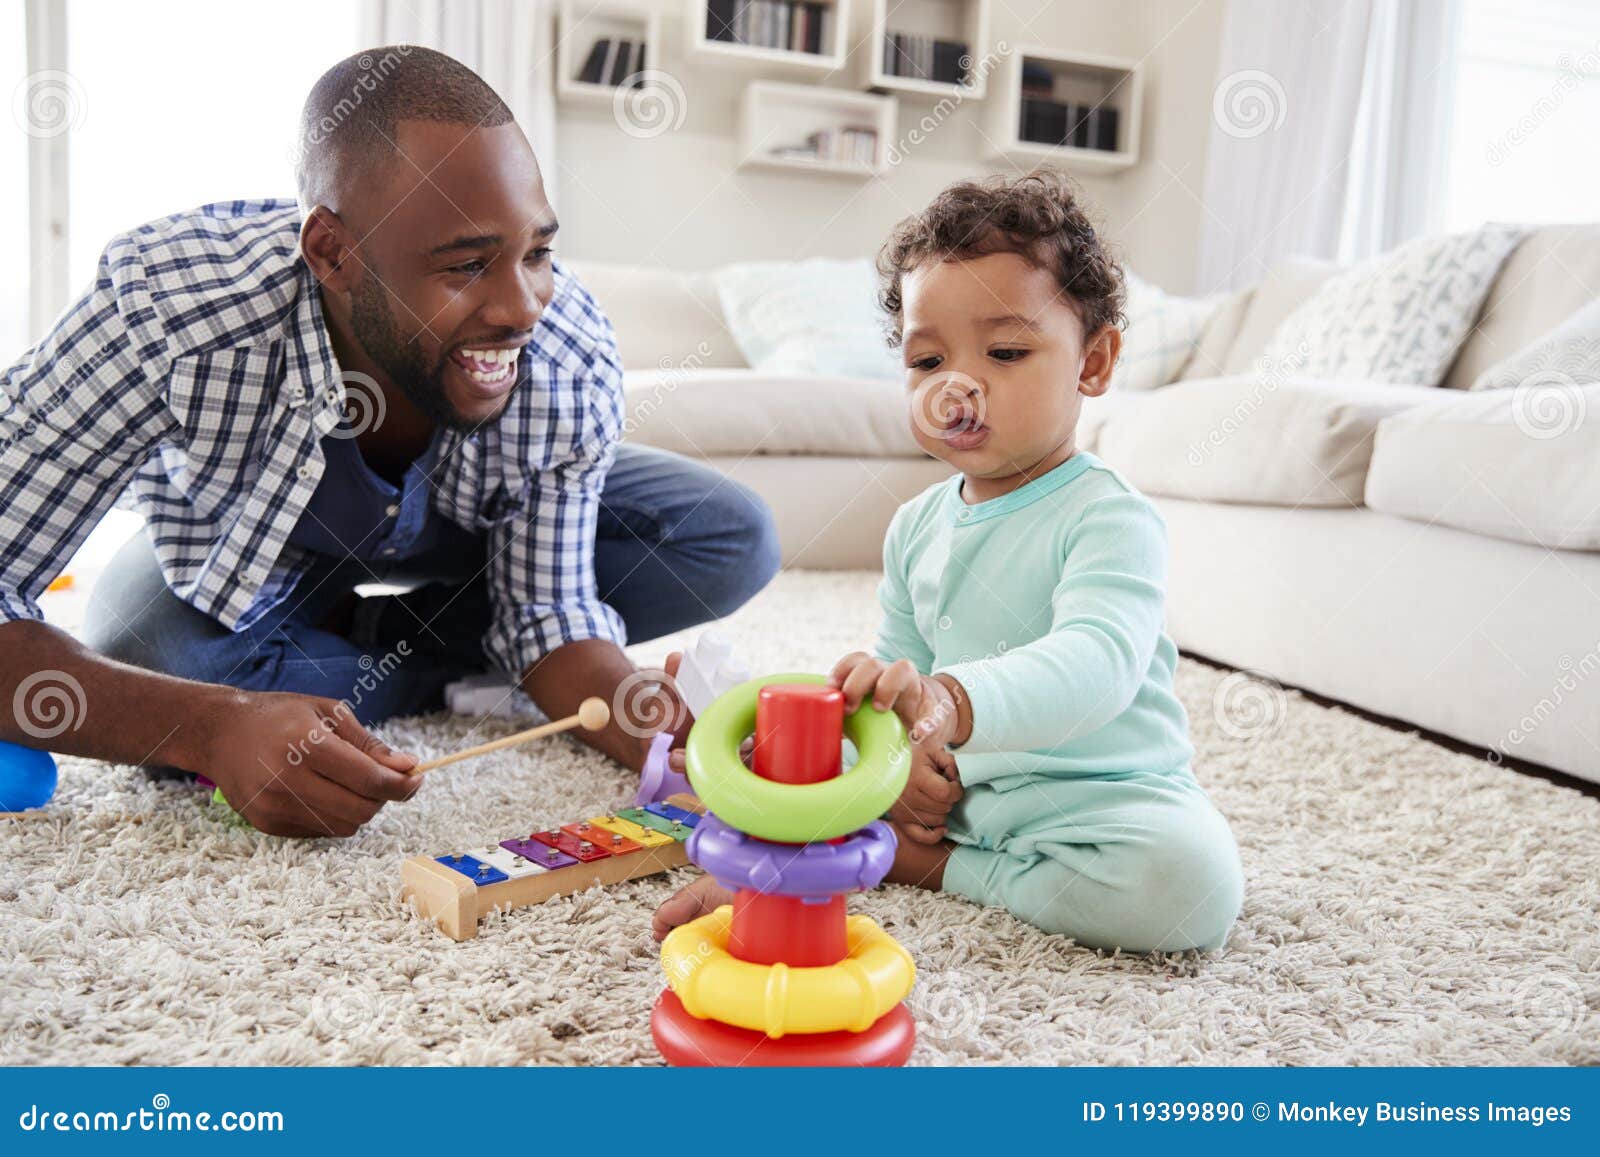 black dad and toddler son playing on floor at home, close up